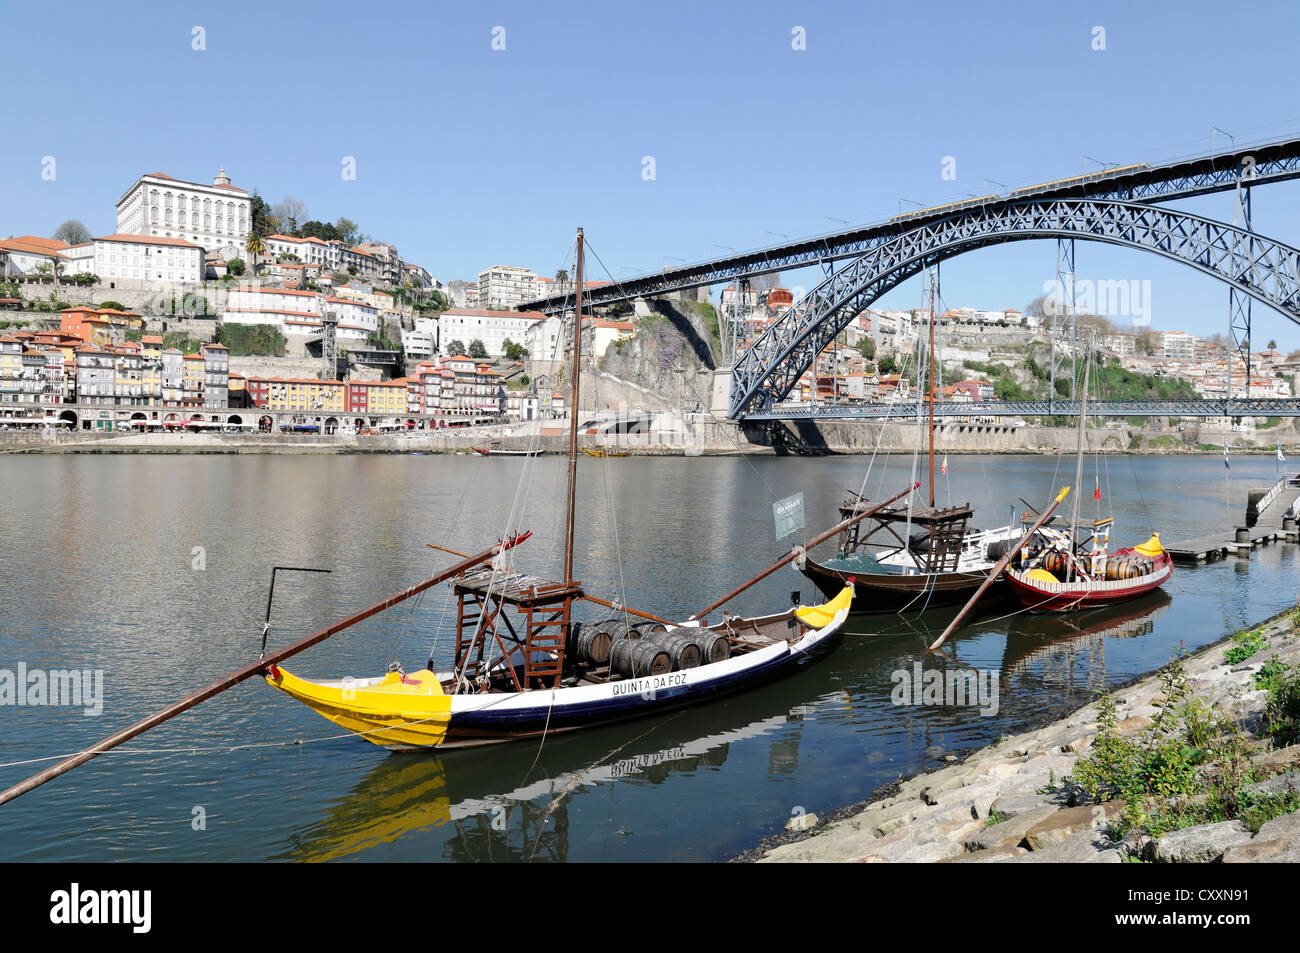 Port vessels, Ponte de D. Luis I over the Douro river at back, Northern Portugal, Portugal, Europe Stock Photo